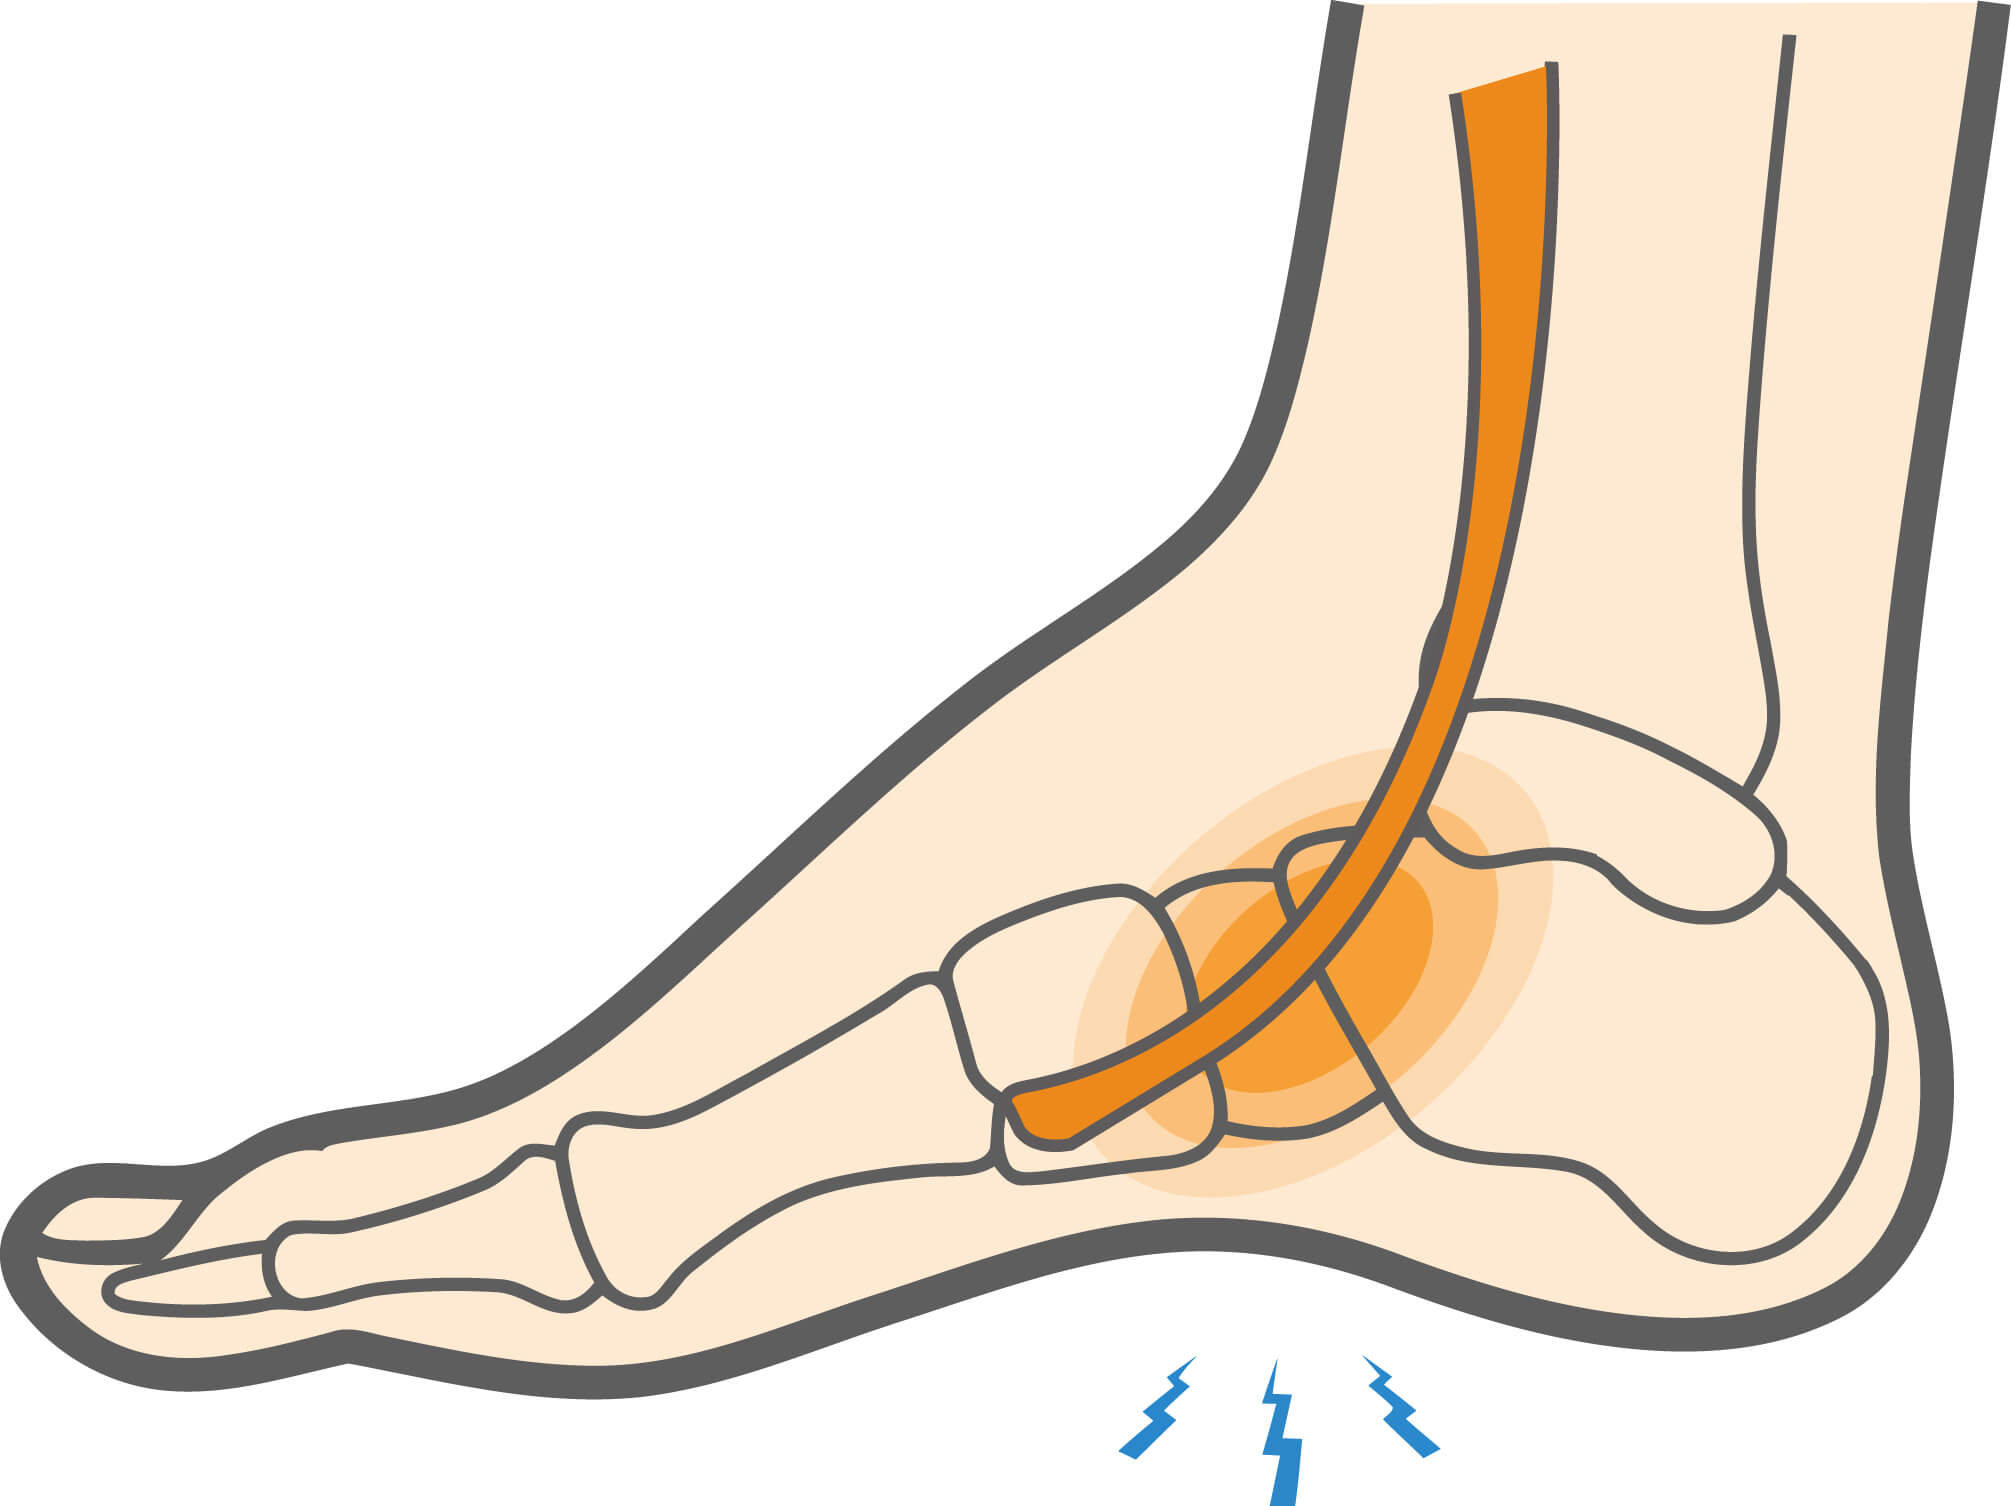 Extensor Tendonitis: What It Is, Causes & Treatment